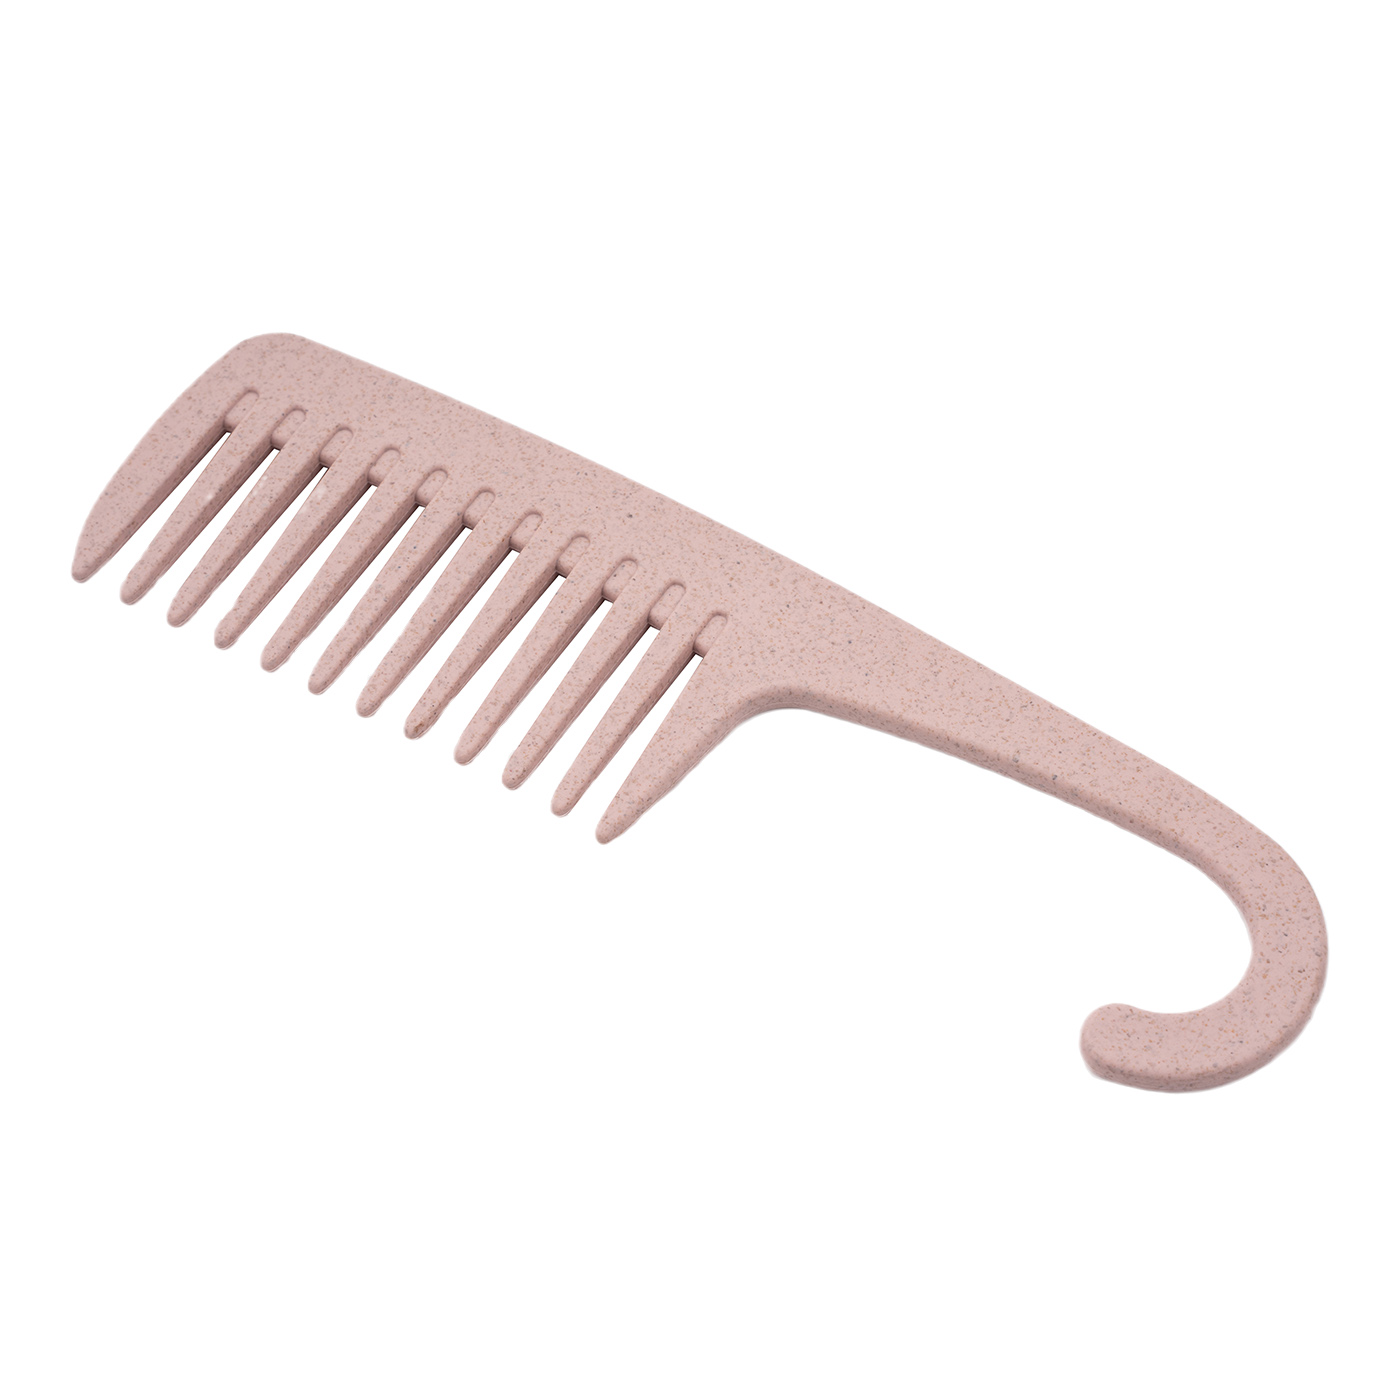 Wide Tooth Wheat Straw Comb With Curved Hook Handle2